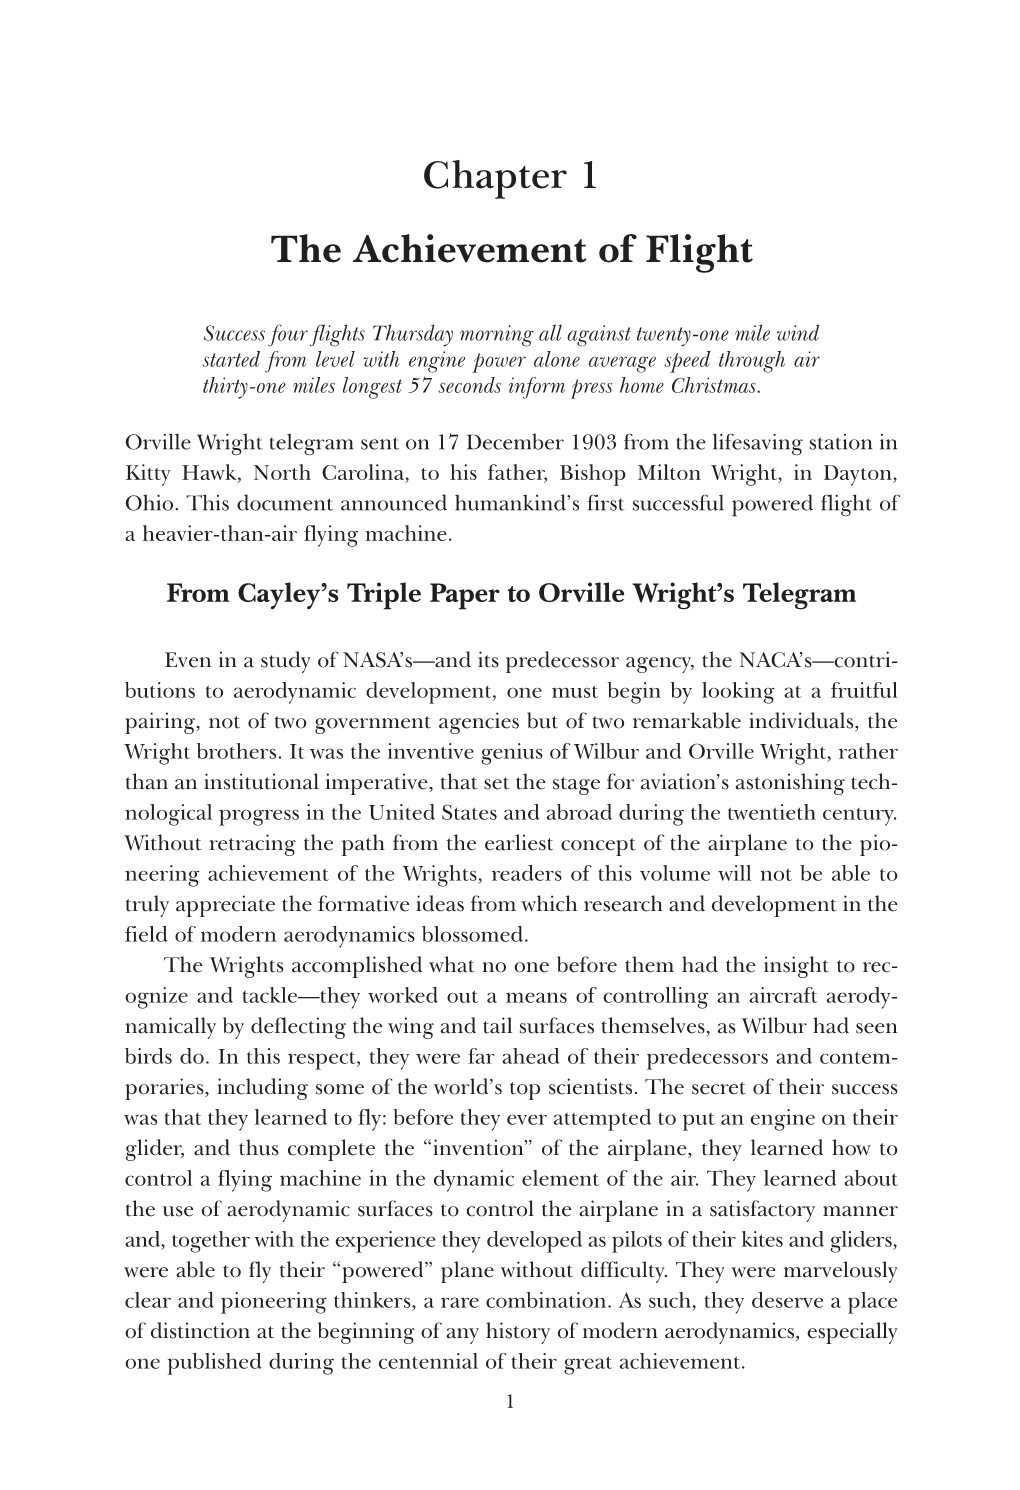 Chapter 1 the Achievement of Flight